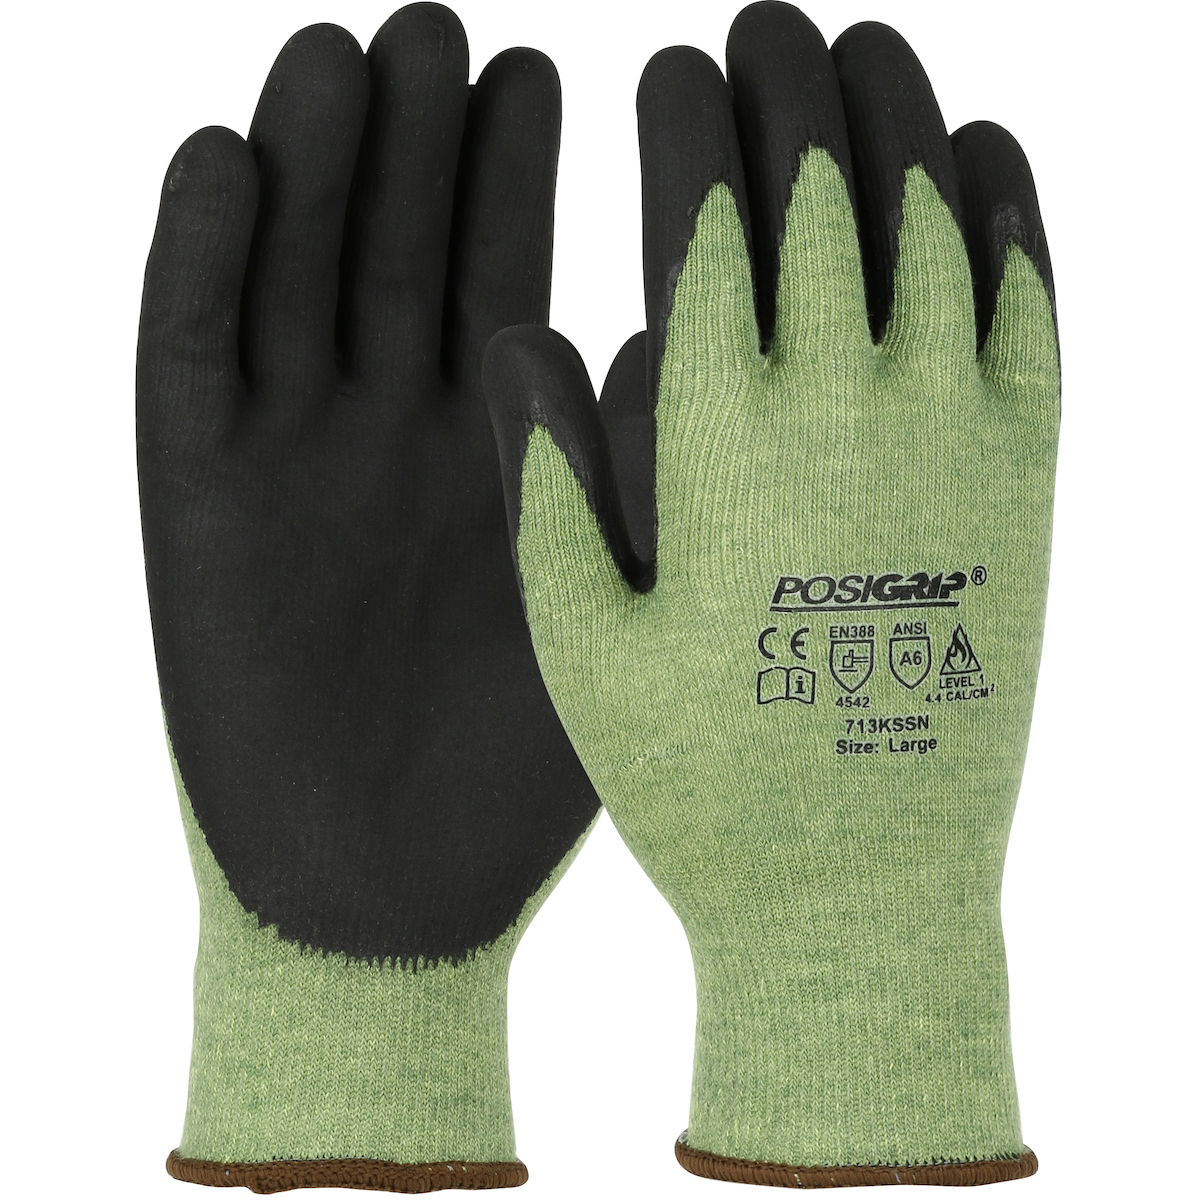 713KSSN  PIP® PosiGrip® Seamless Knit Aramid Blended Glove with Nitrile Foam Coated Grip on Palm & Fingers